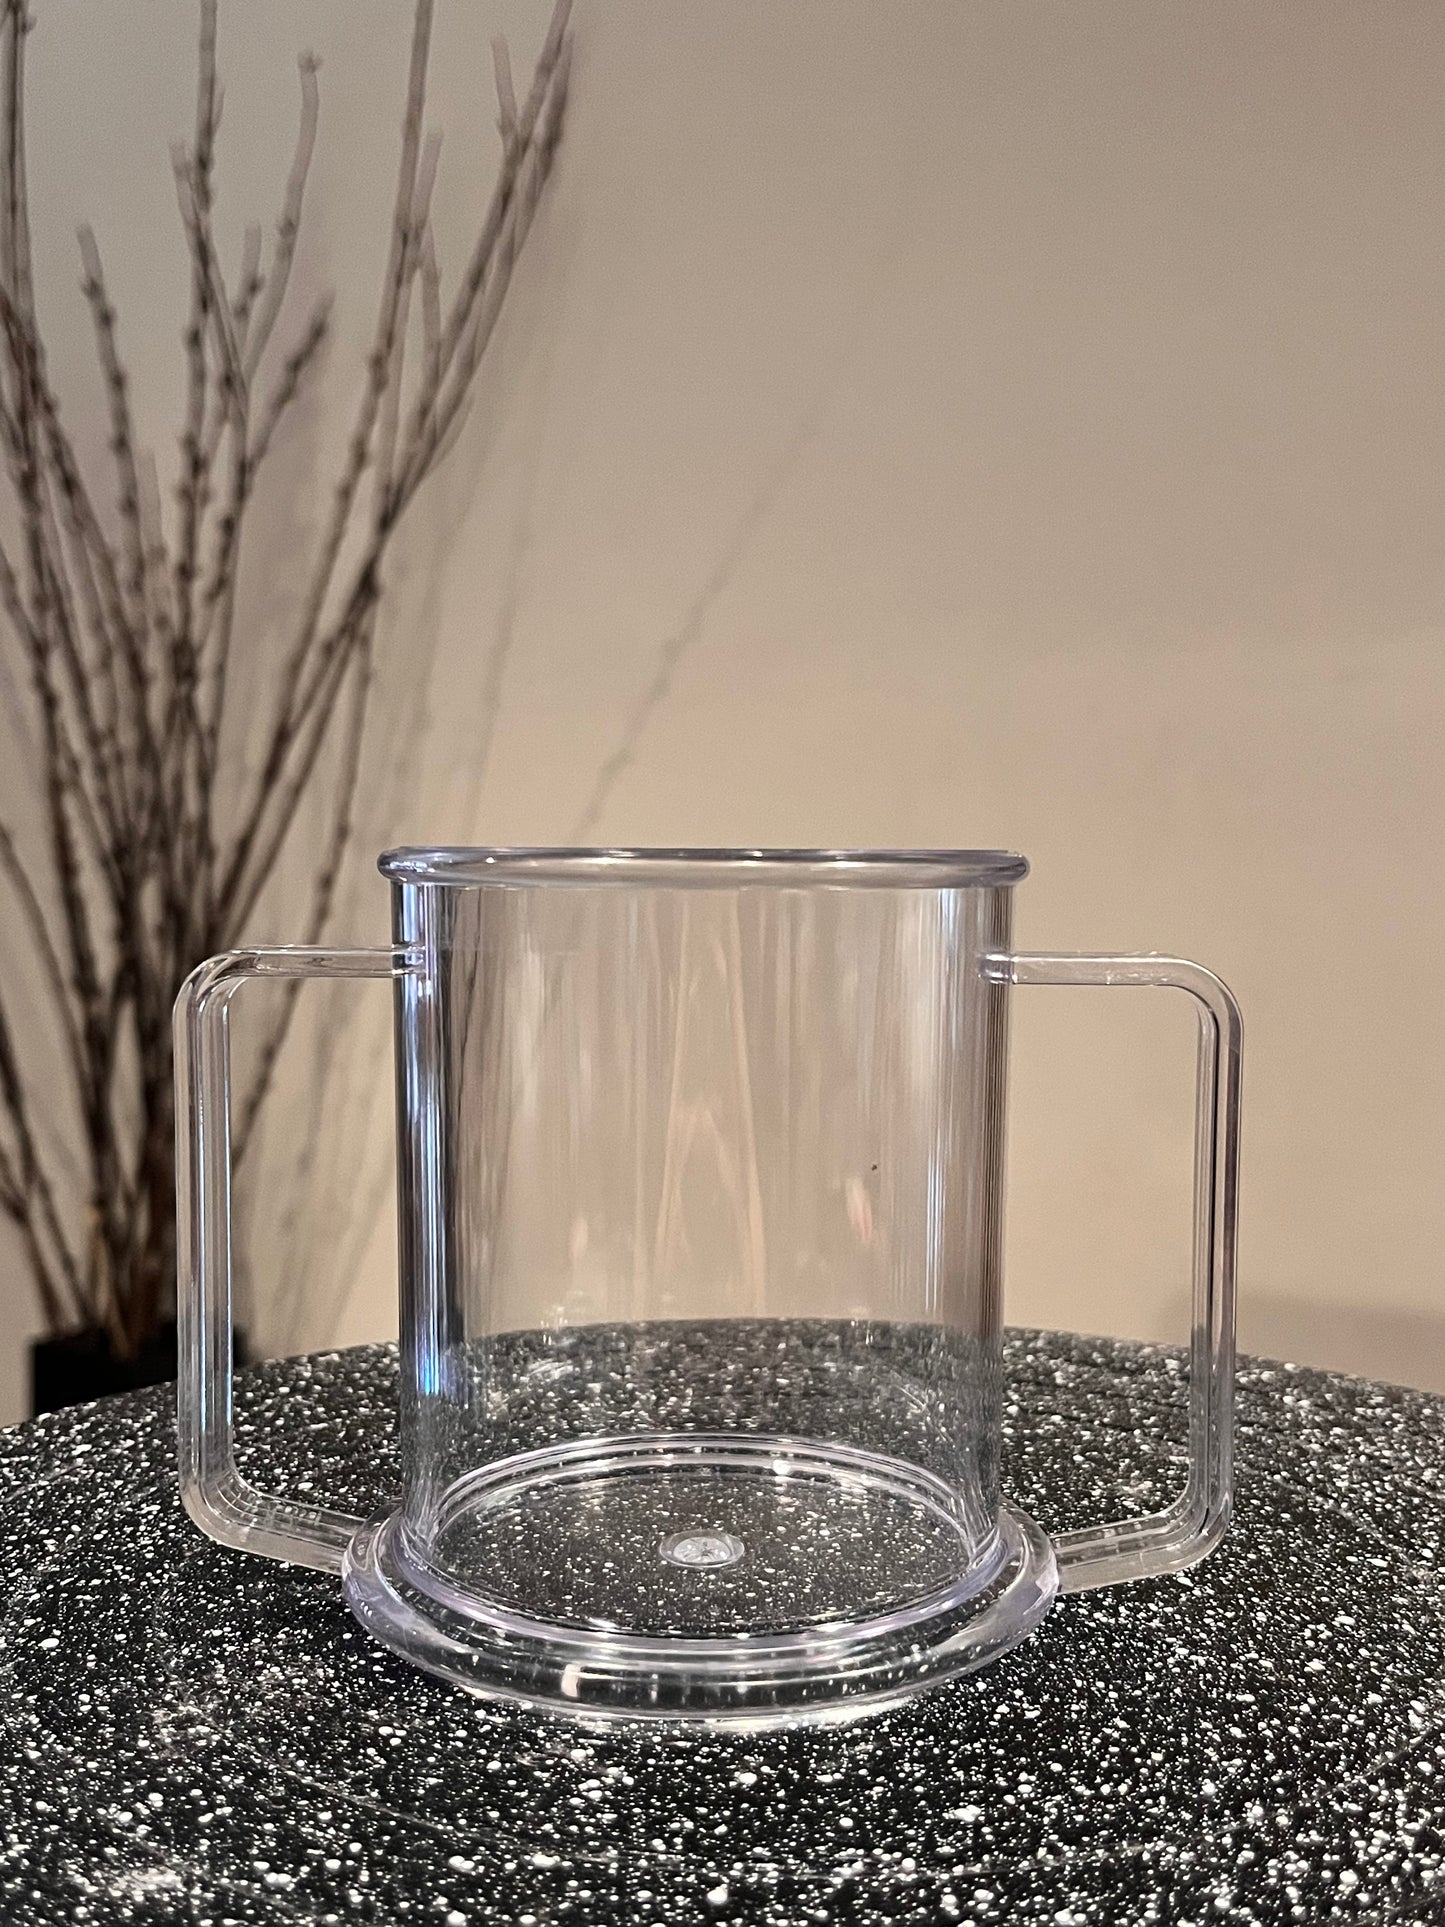 Independent drinking cup